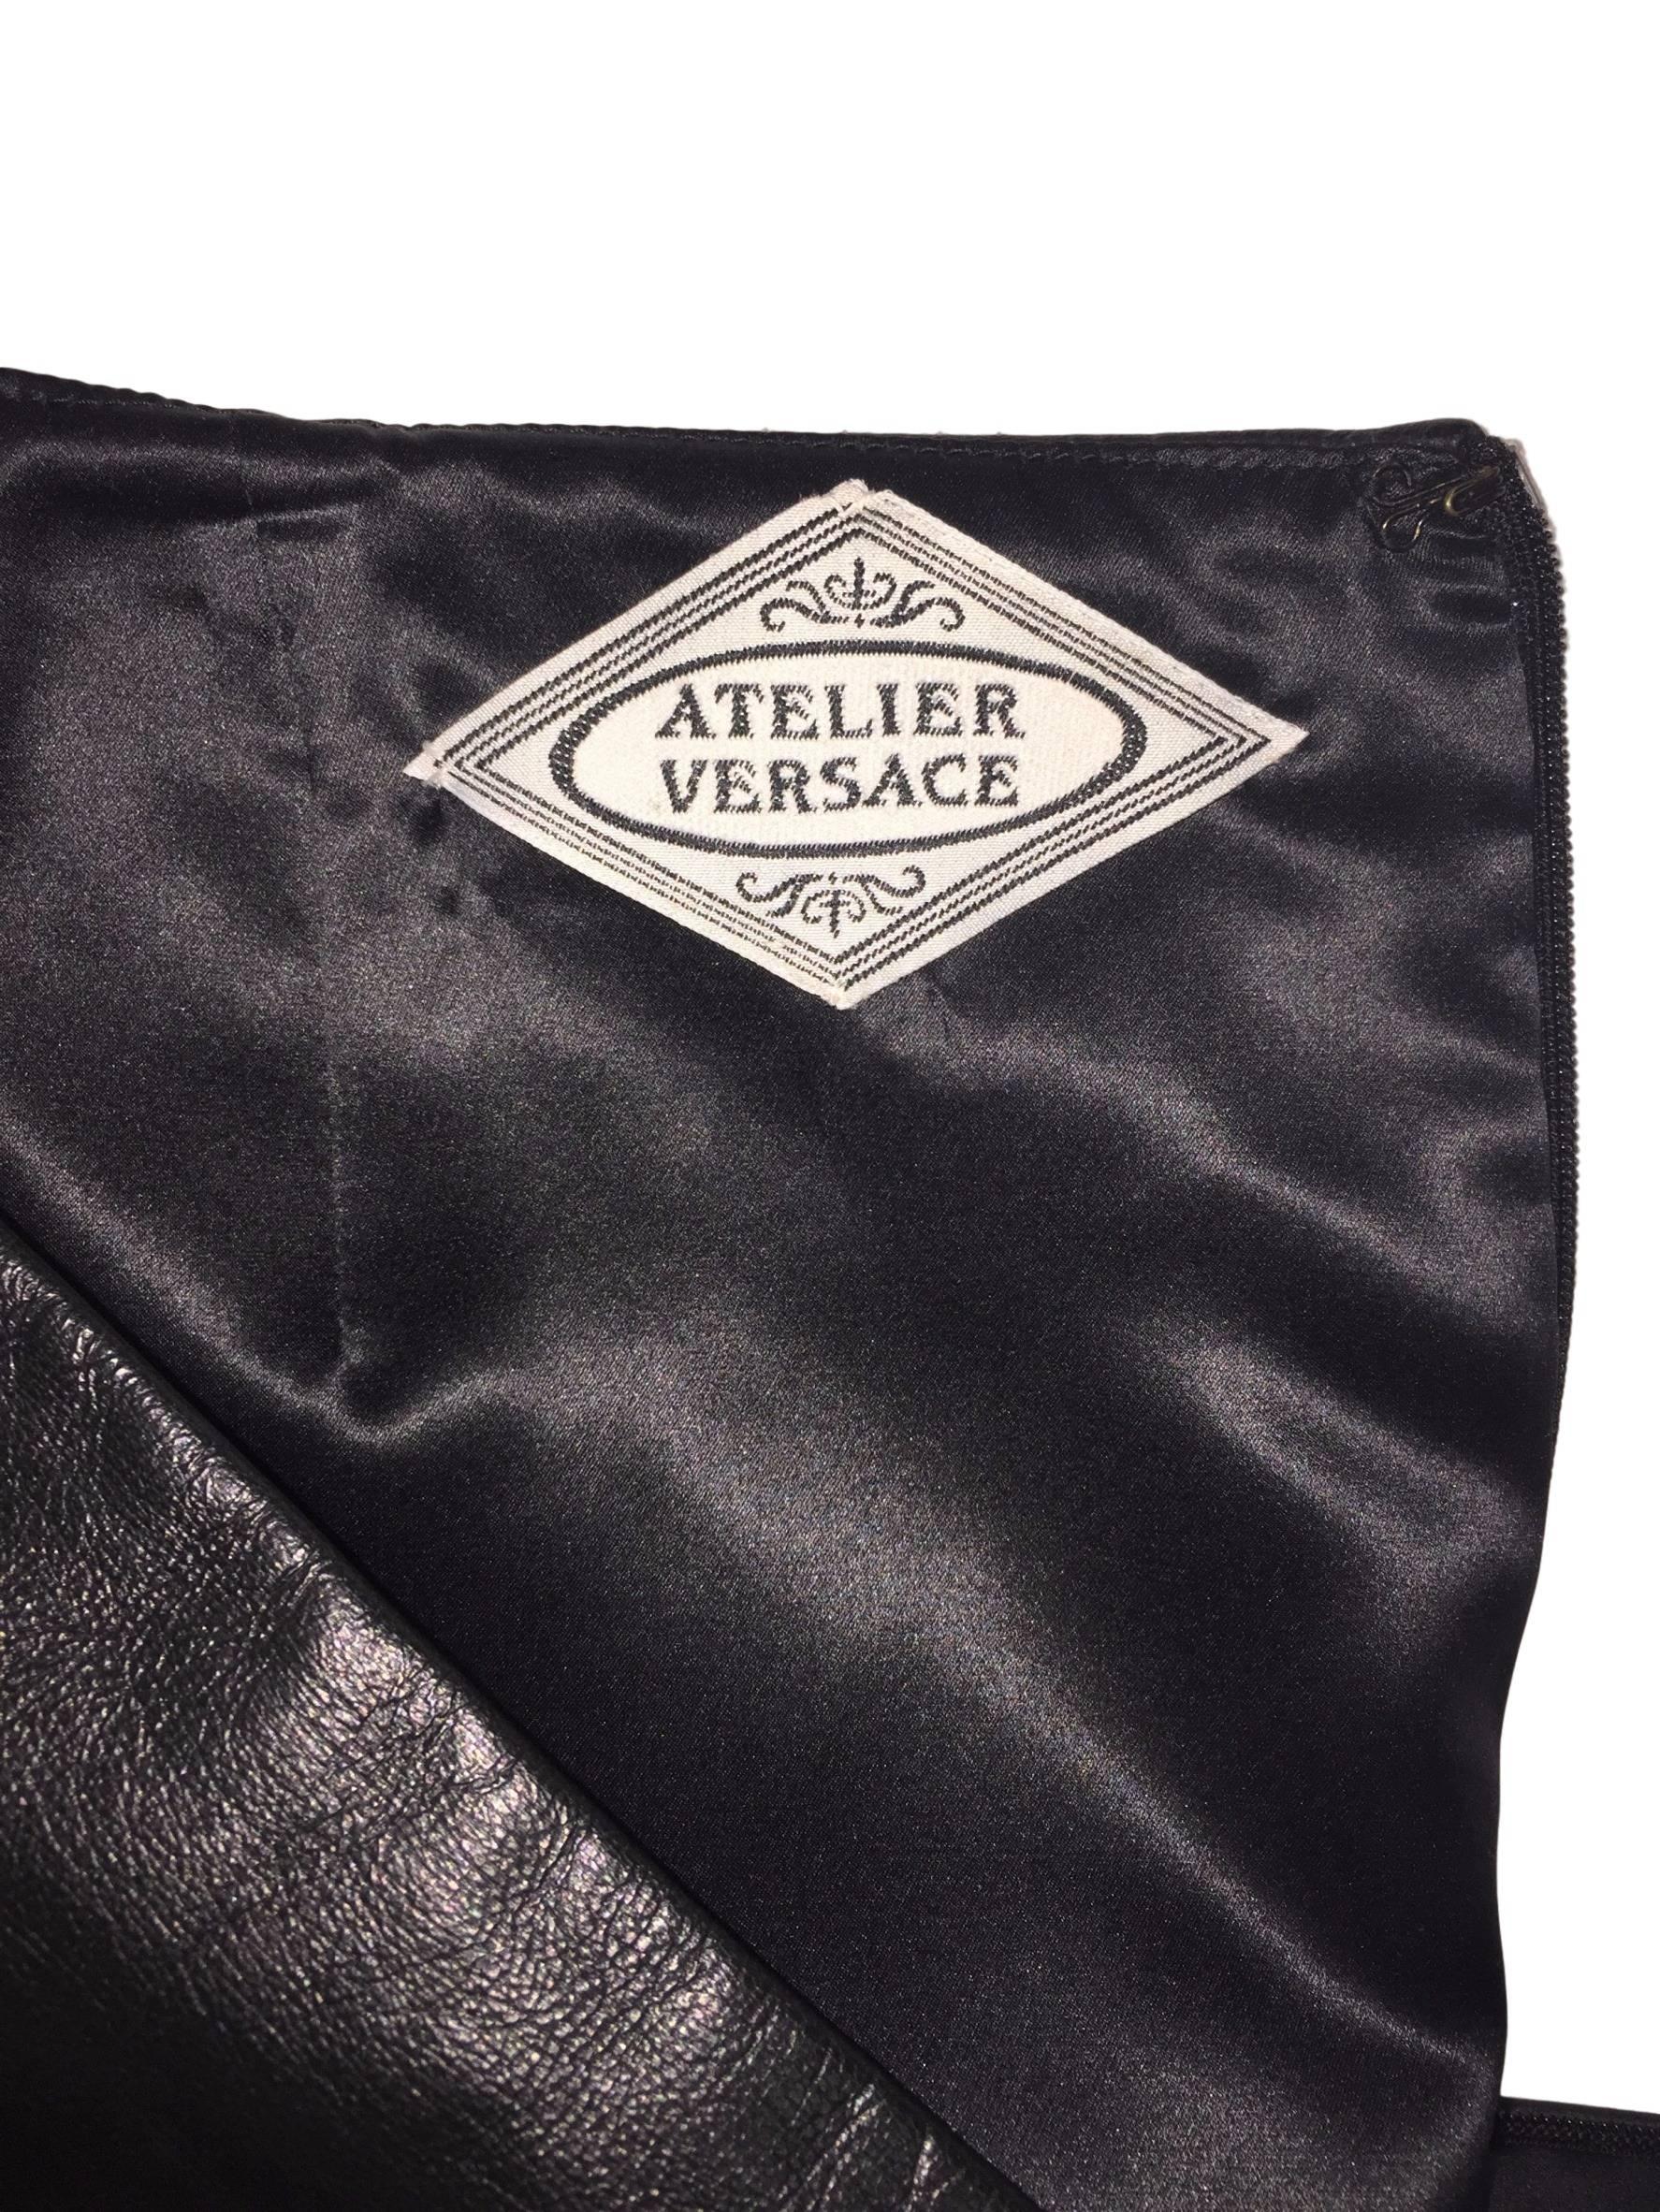 1990's Atelier Versace by Gianni Black Leather Mini Skirt M In Excellent Condition In Yukon, OK